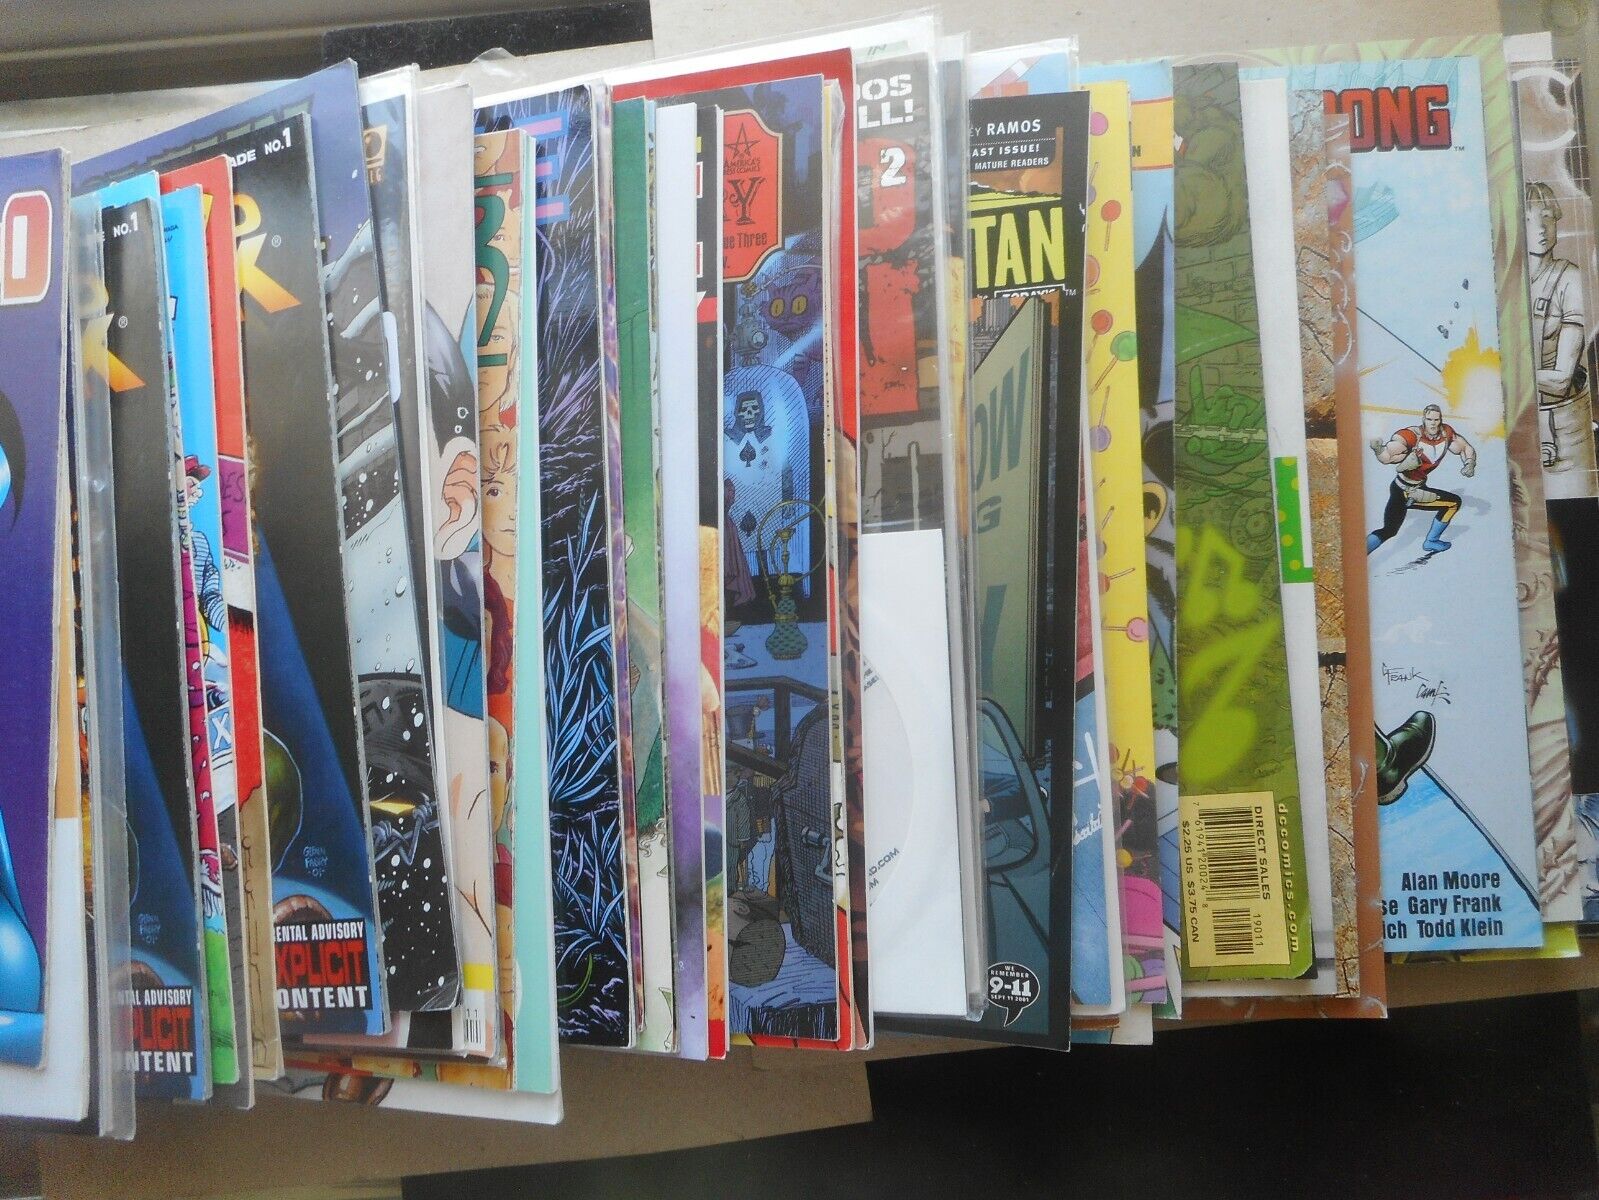  LOT Of 50 Different Comics from a Comic Book Shop - SEE PICS